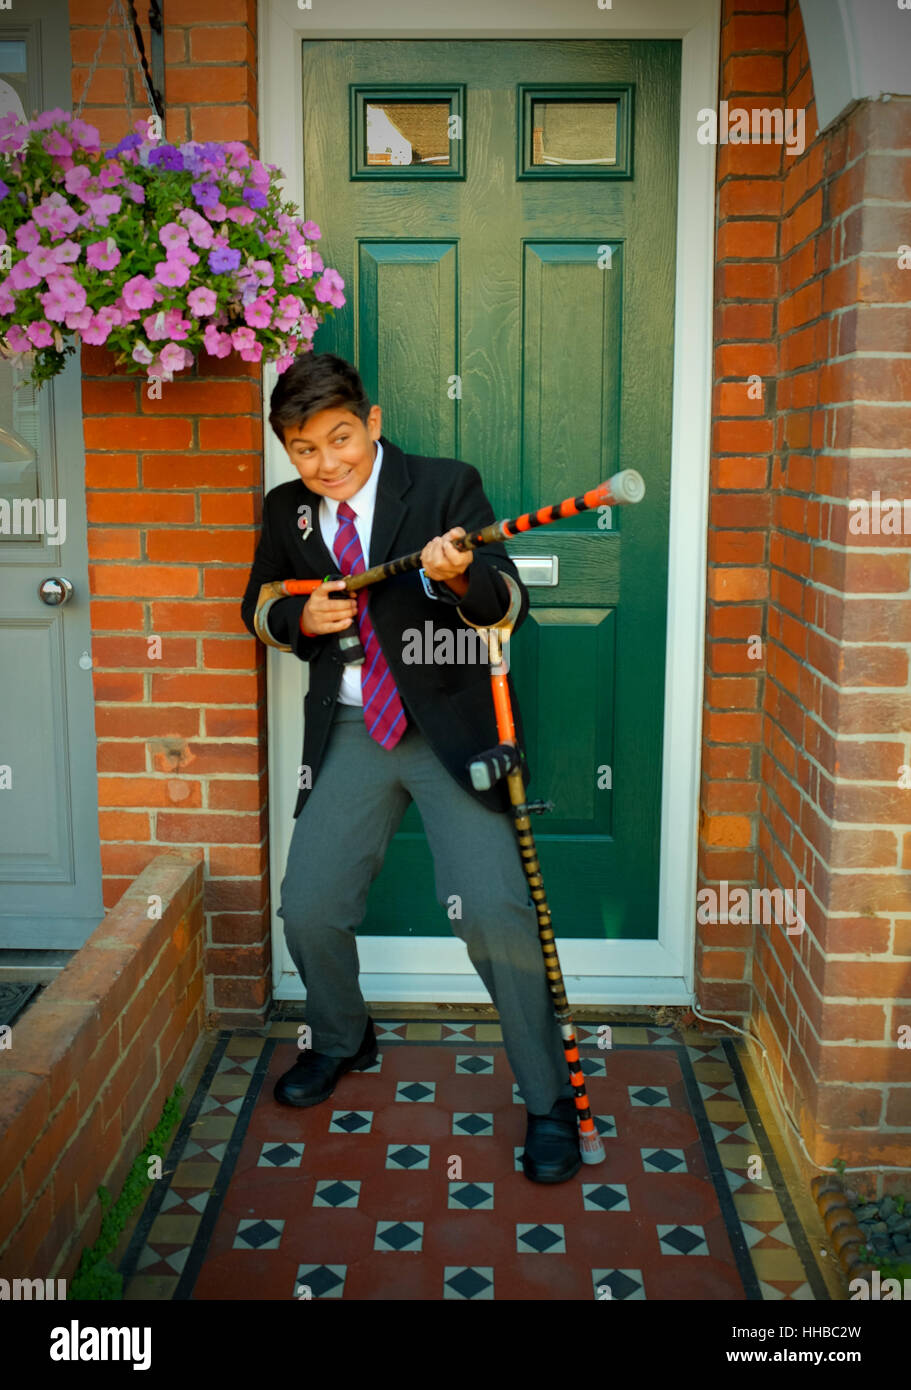 12 year old school boy in school uniform outside the front door of his house, he has crutches and is pointing one of them. Stock Photo